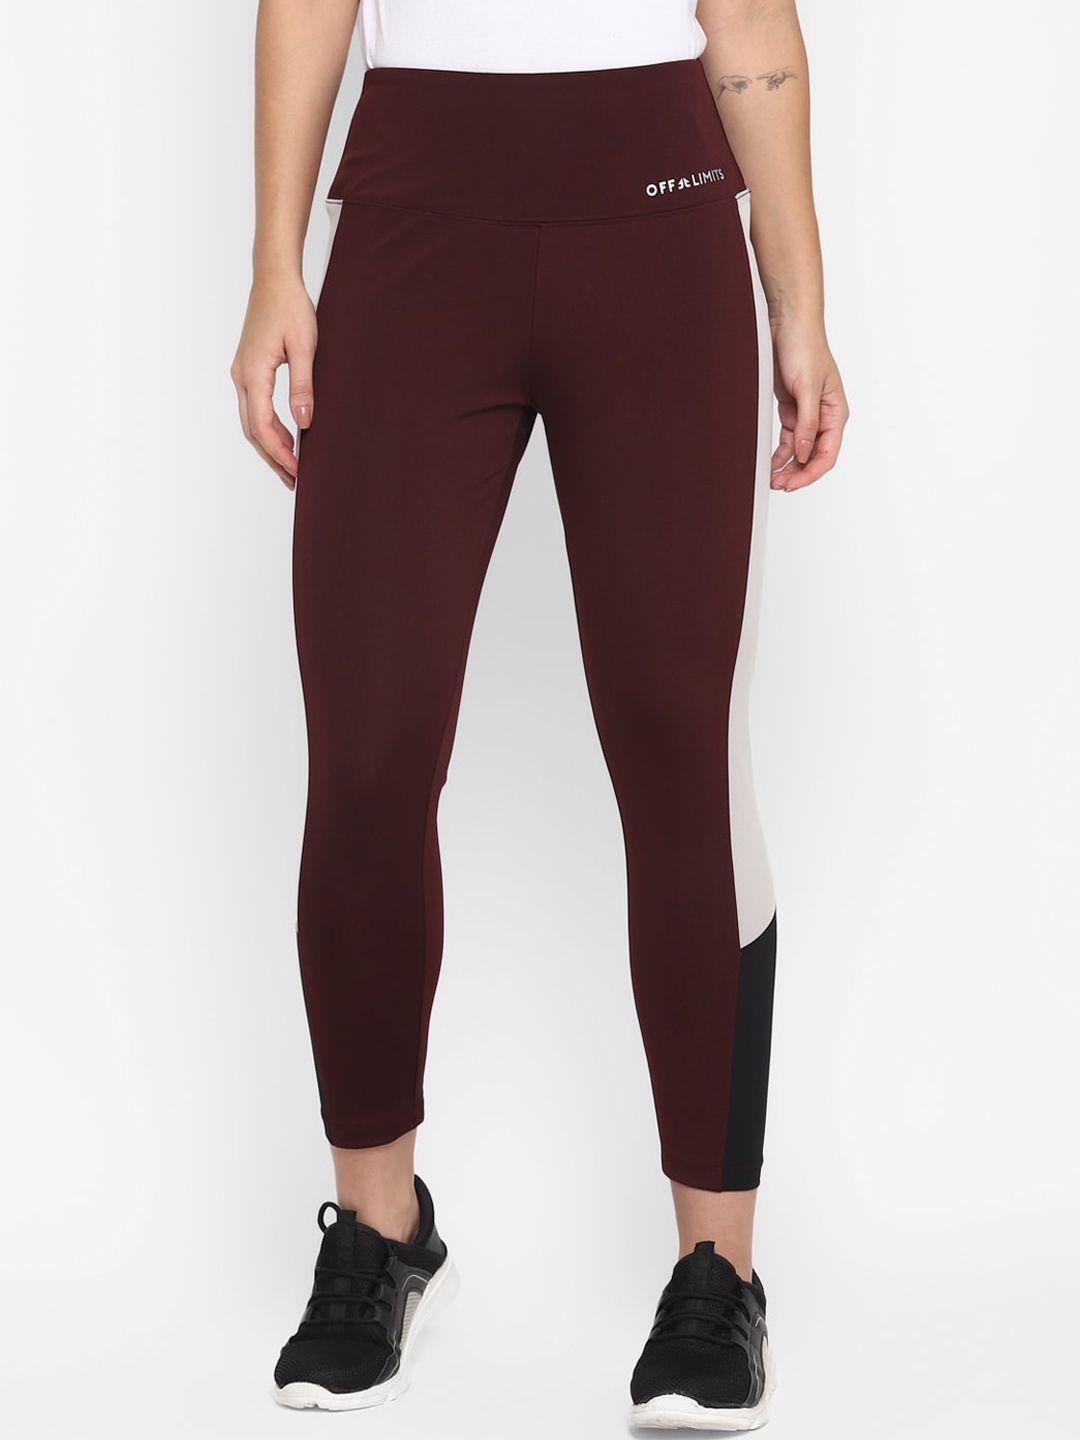 off limits women maroon & white solid anti microbial tights